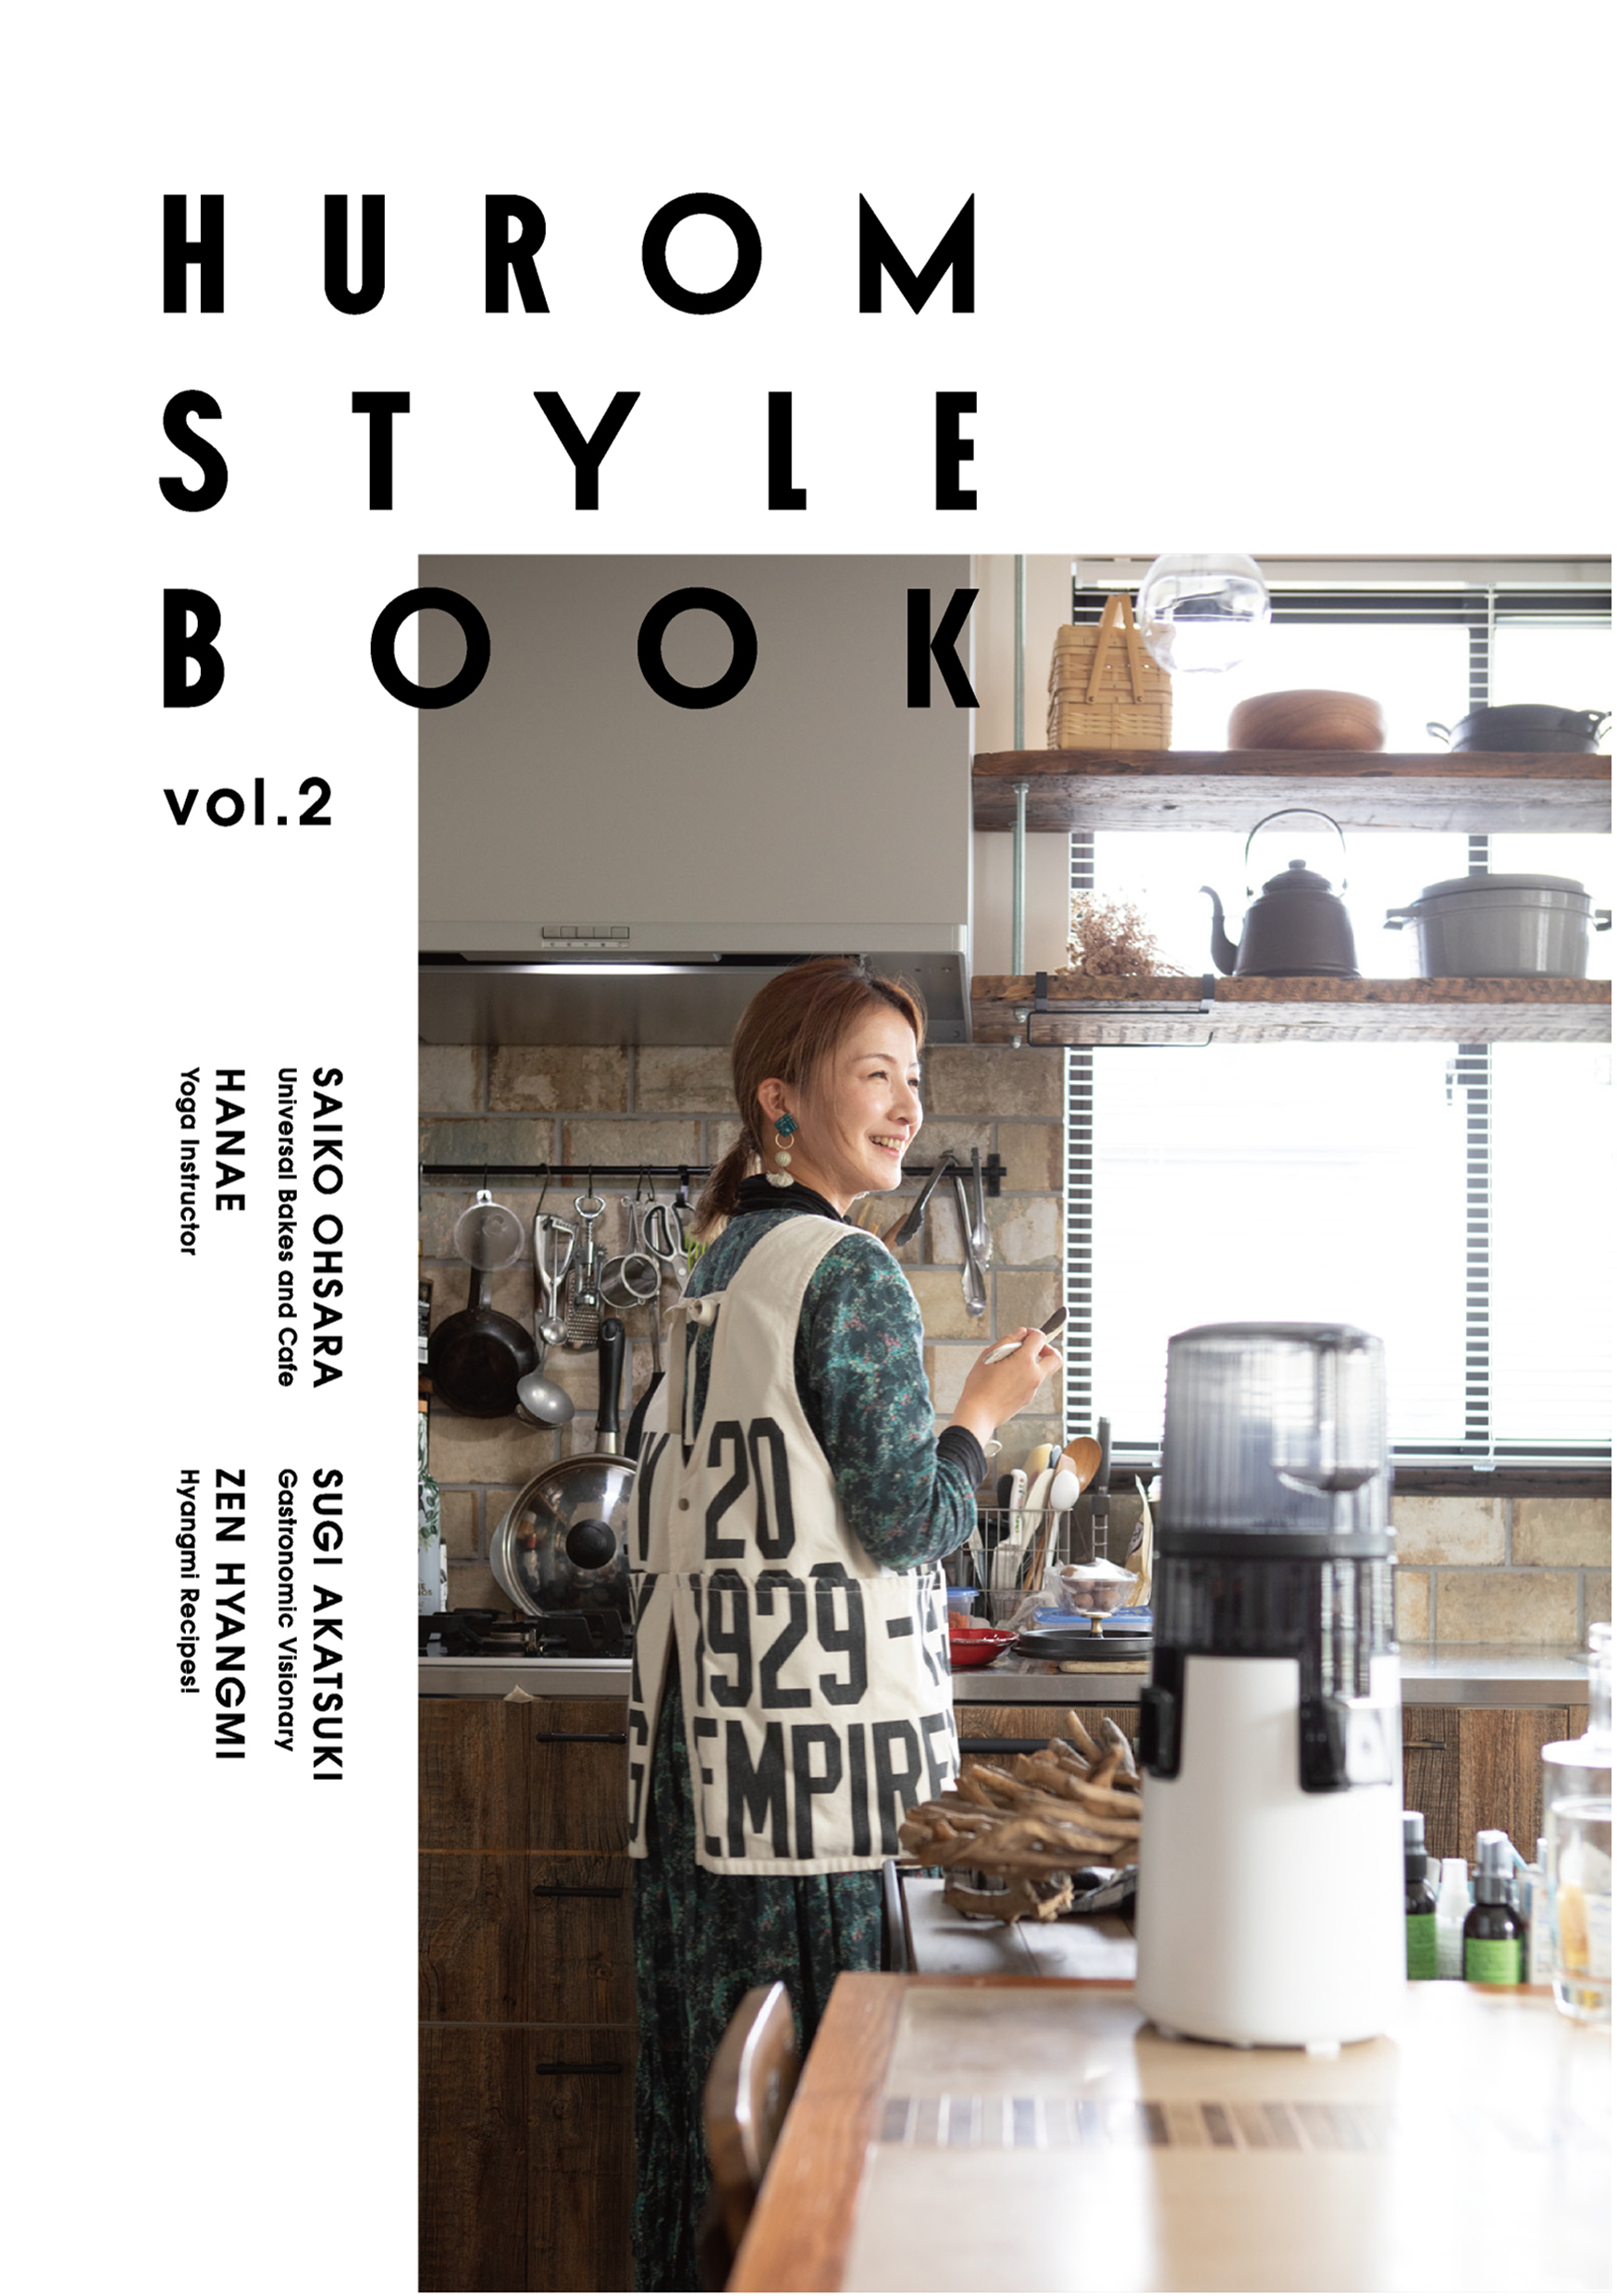 HUROM STYLE BOOK vol.2